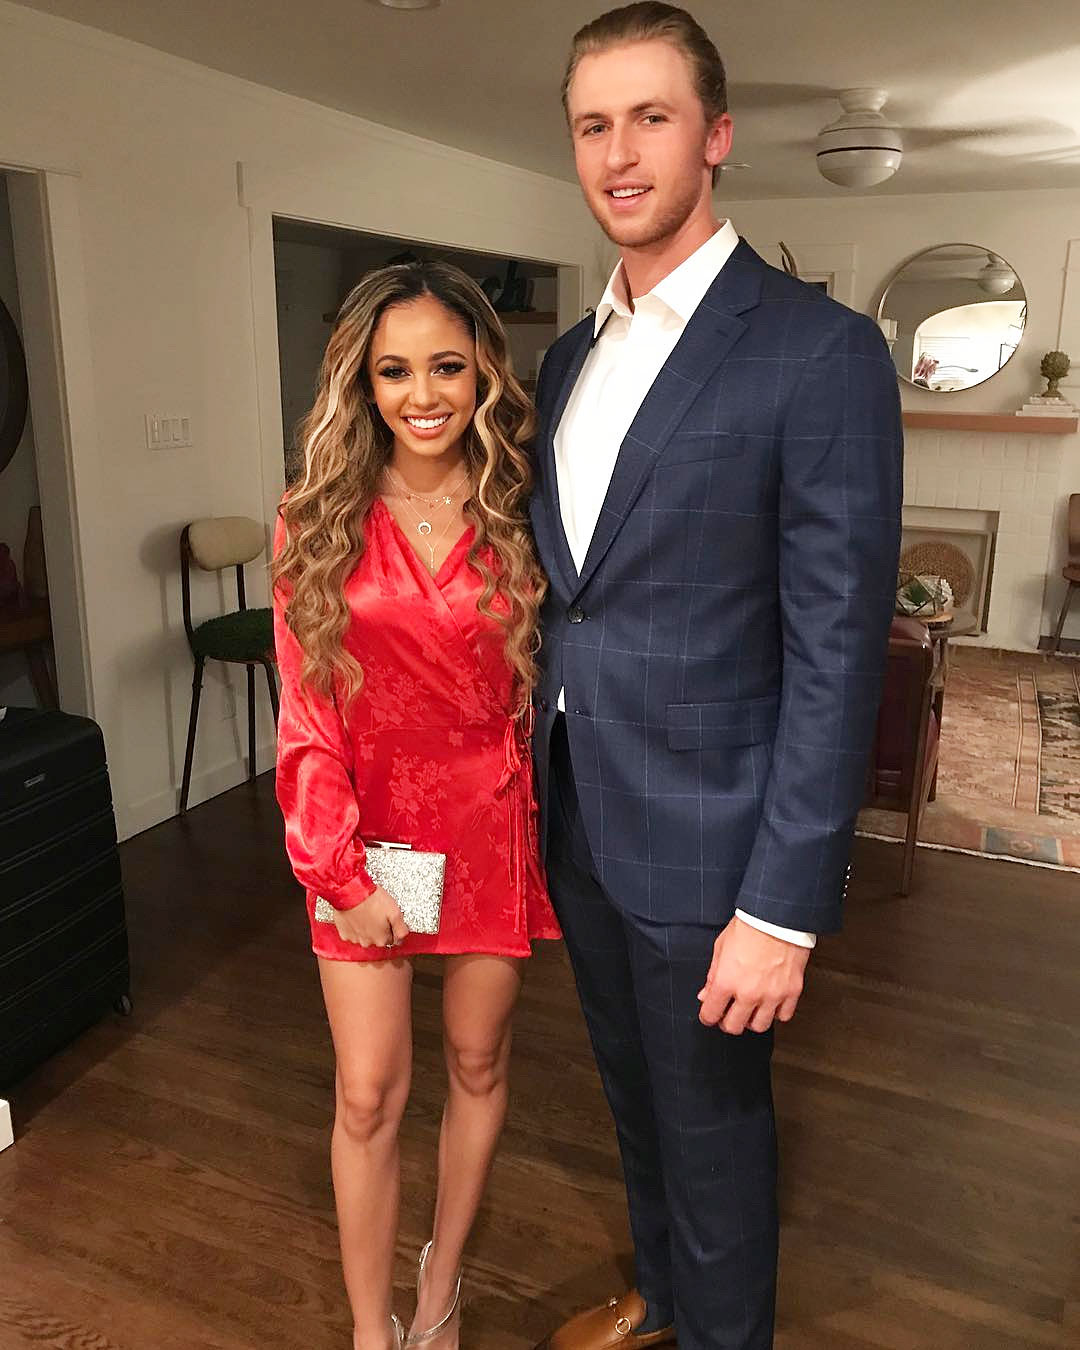 Michael Kopech Engaged to Vanessa Morgan from Riverdale